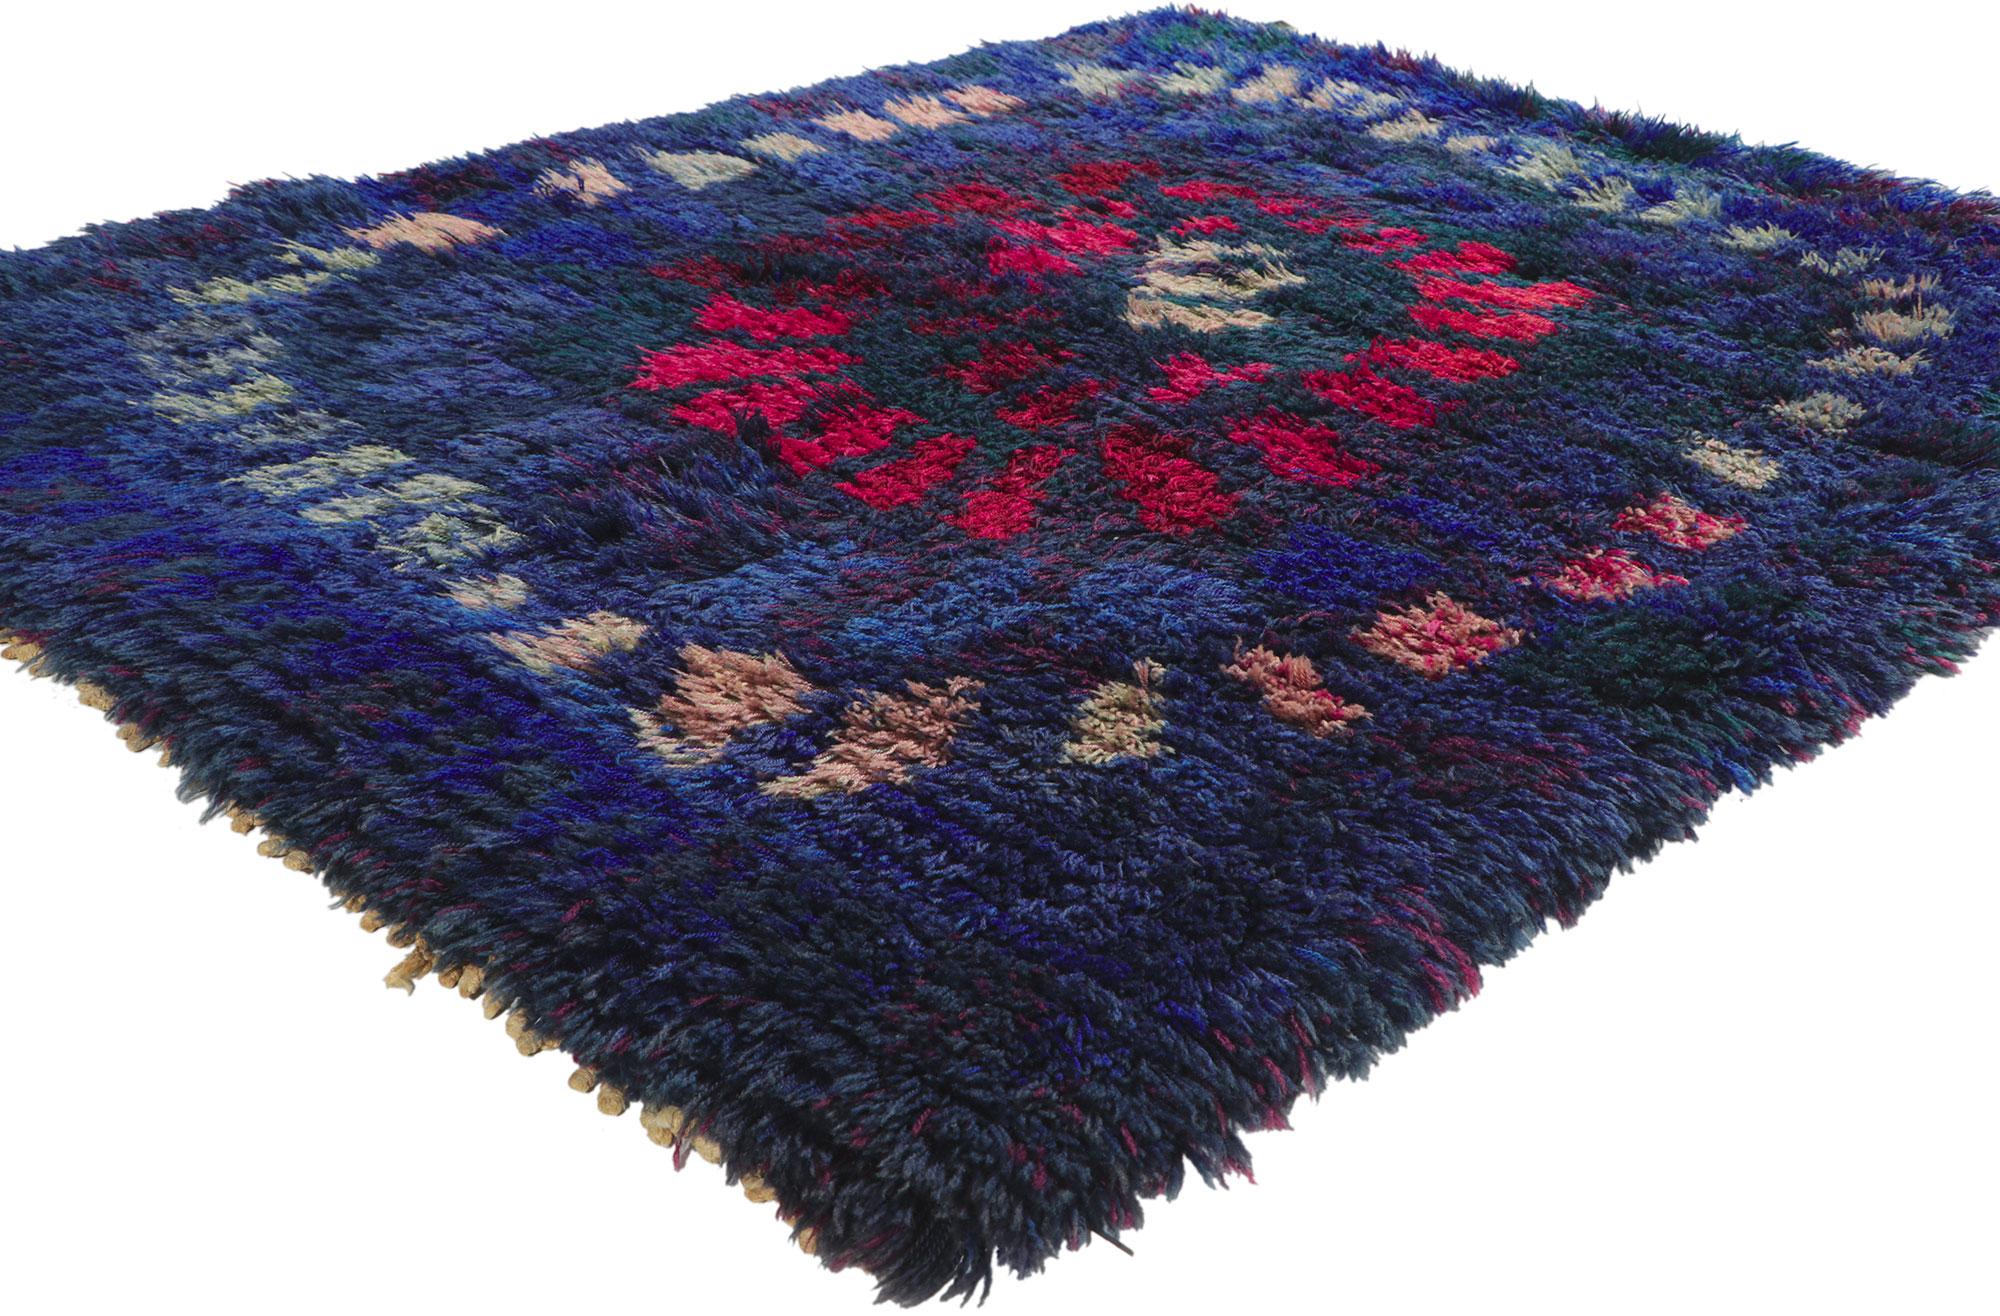 78473 Vintage Swedish Rya Rug by Viola Grasten, 04'03 x 05'03.
Midsommar by Viola Gråsten, NK Textilkammare. A sewn on label at the back.
Abrash.
Hand knotted wool.
Measures: 04'03 x 05'03.
Made in Sweden.
Date: 1940s-1960s. Mid-20th century.